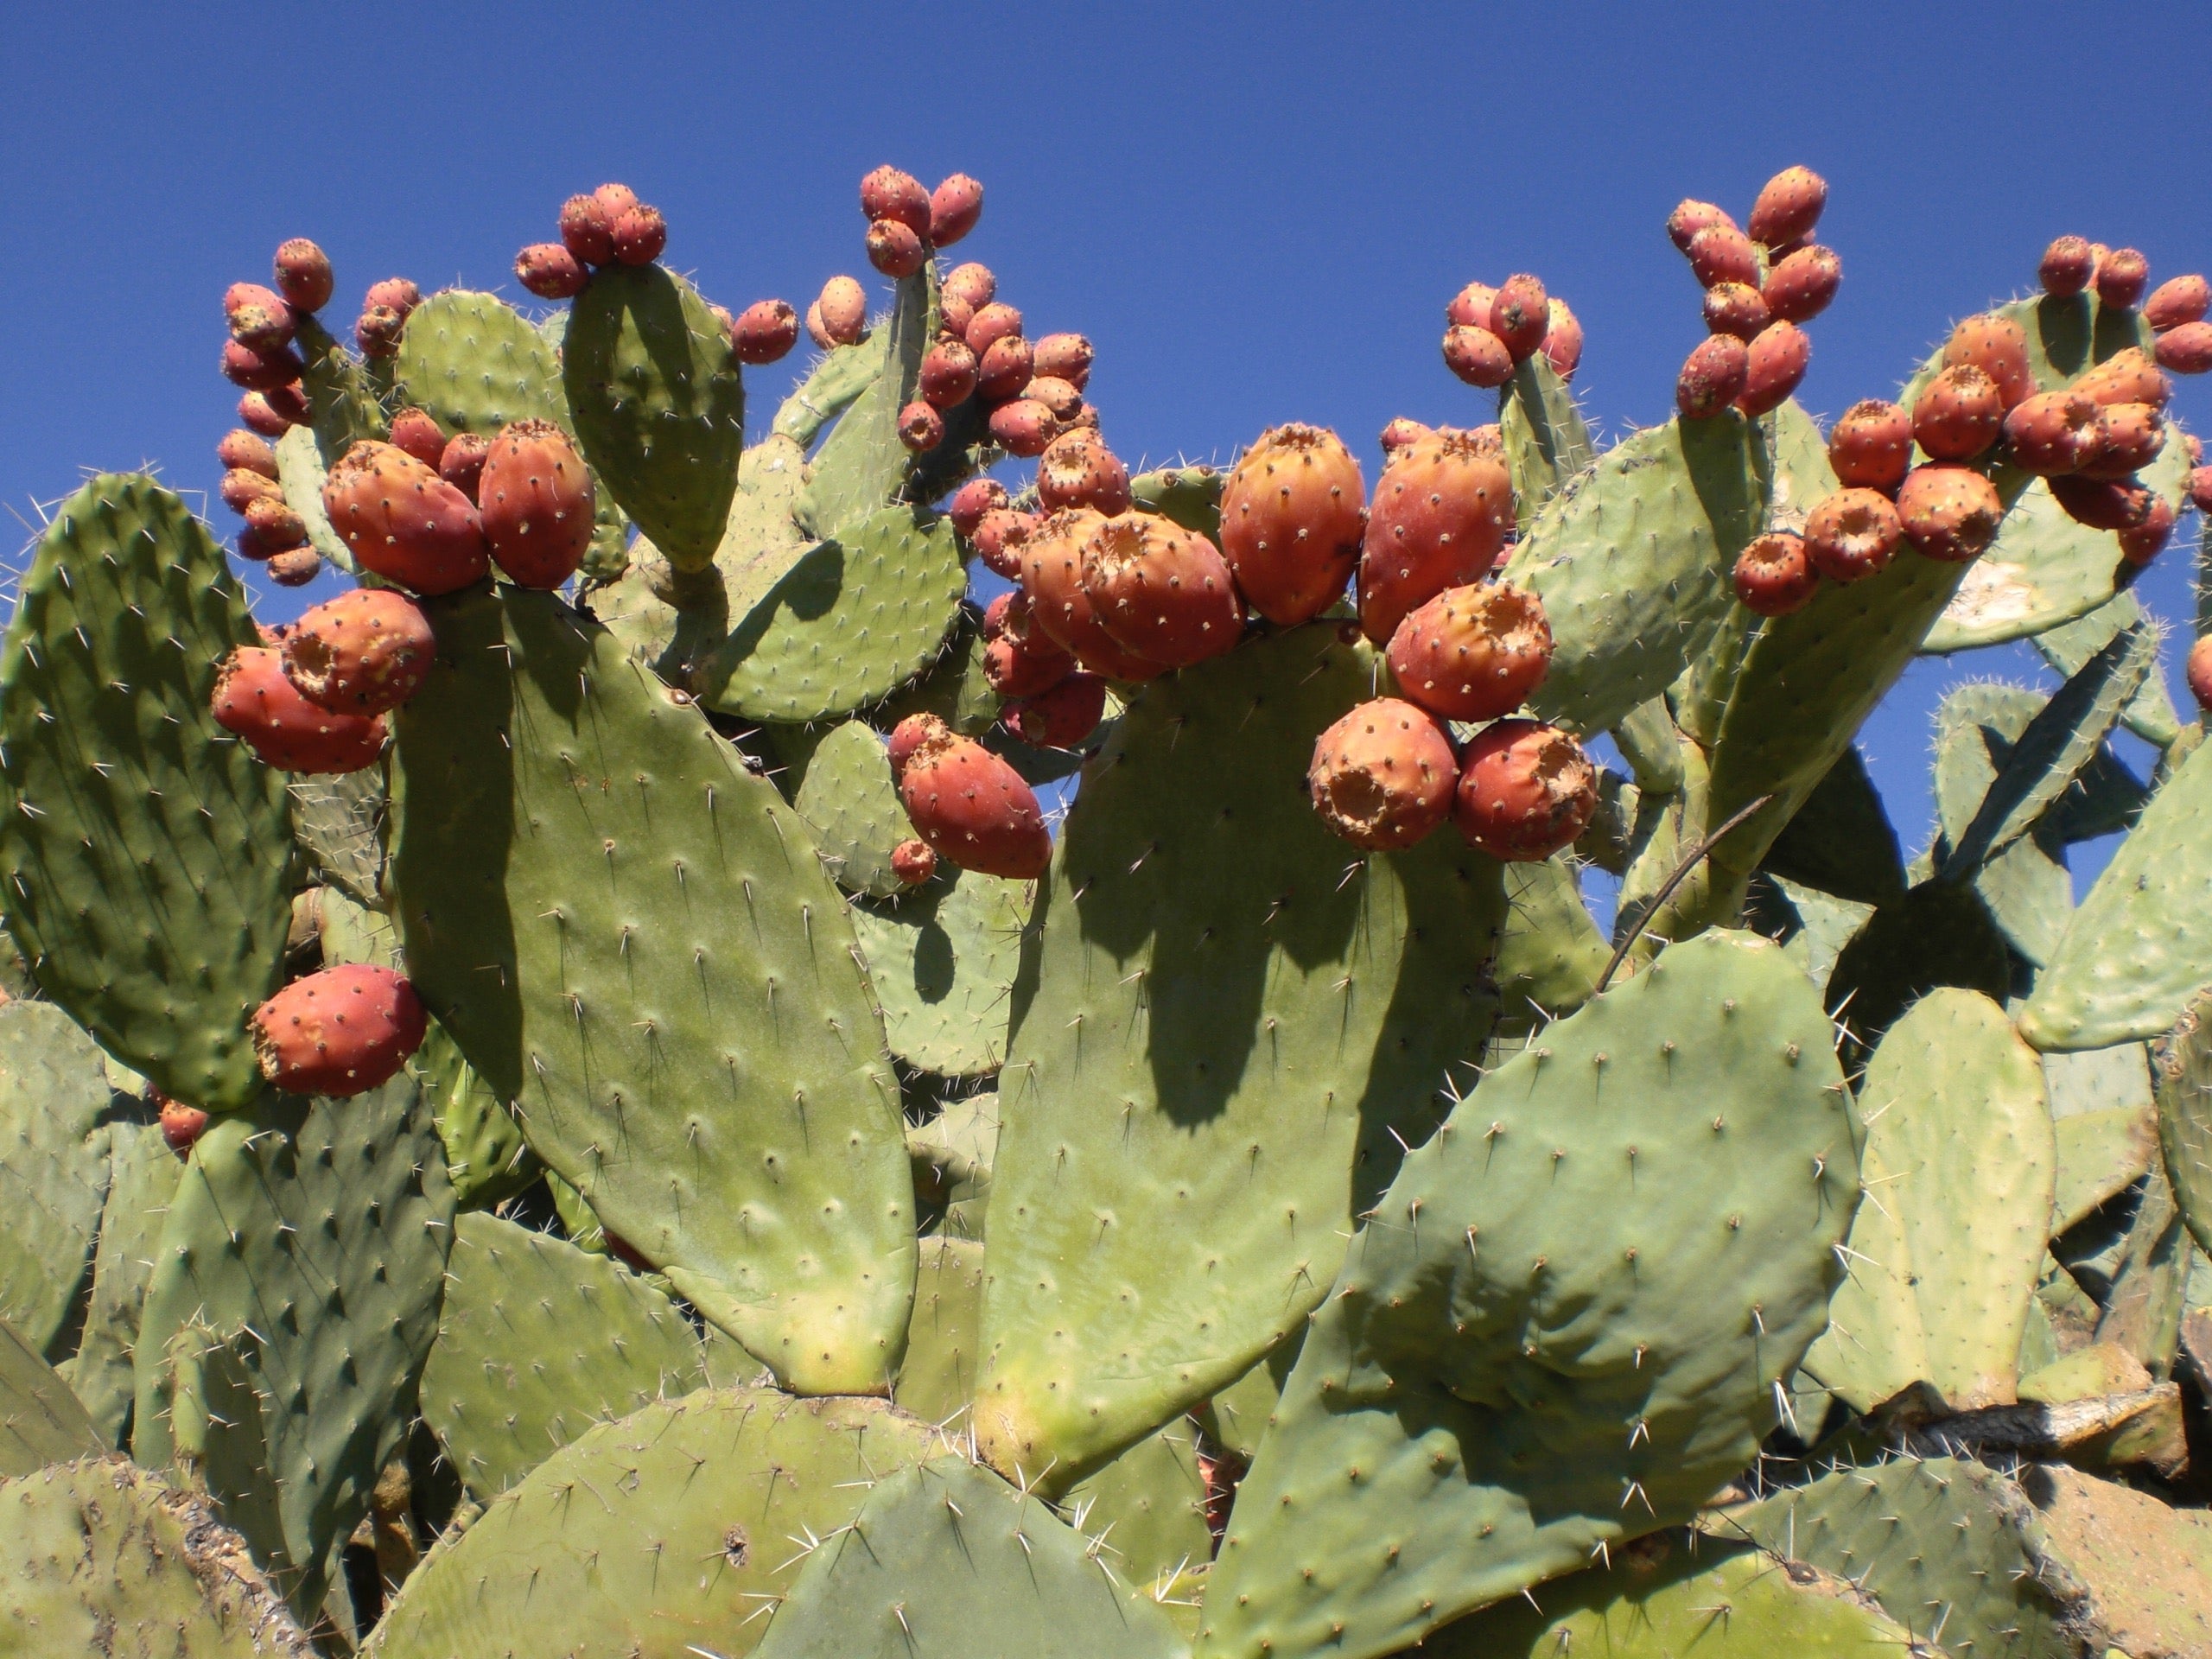 Prickly Pear Cactus in Morocco